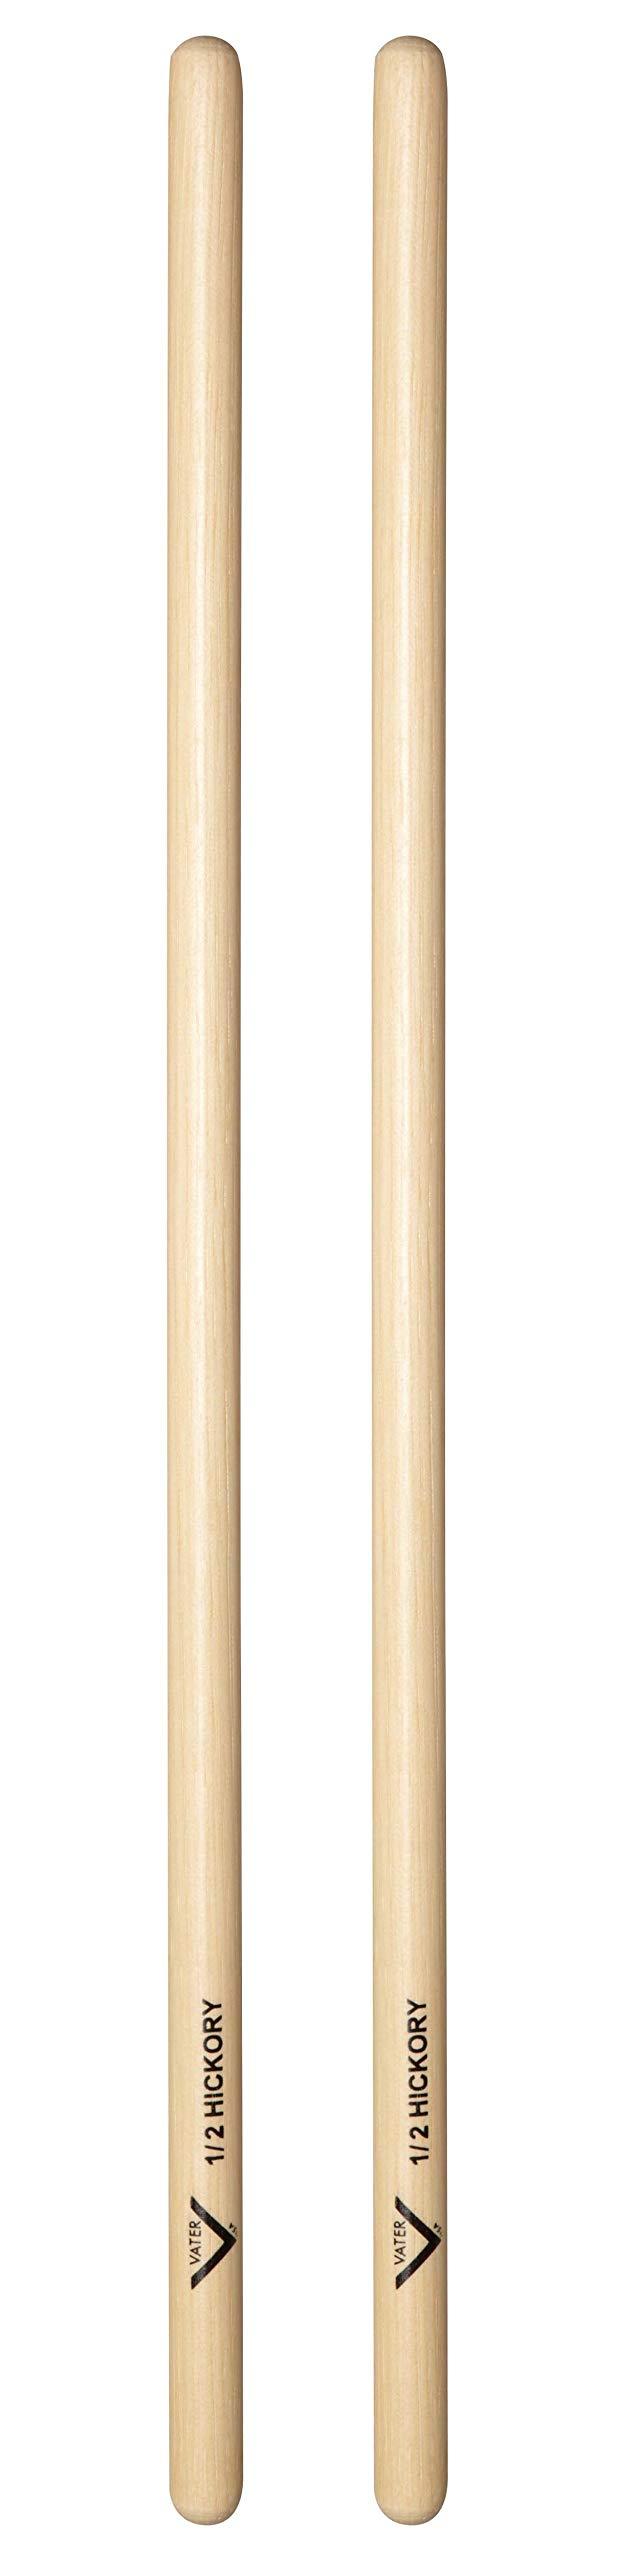 Vater VHT1/2 Hickory 1/2 Timbale Sticks, Pair